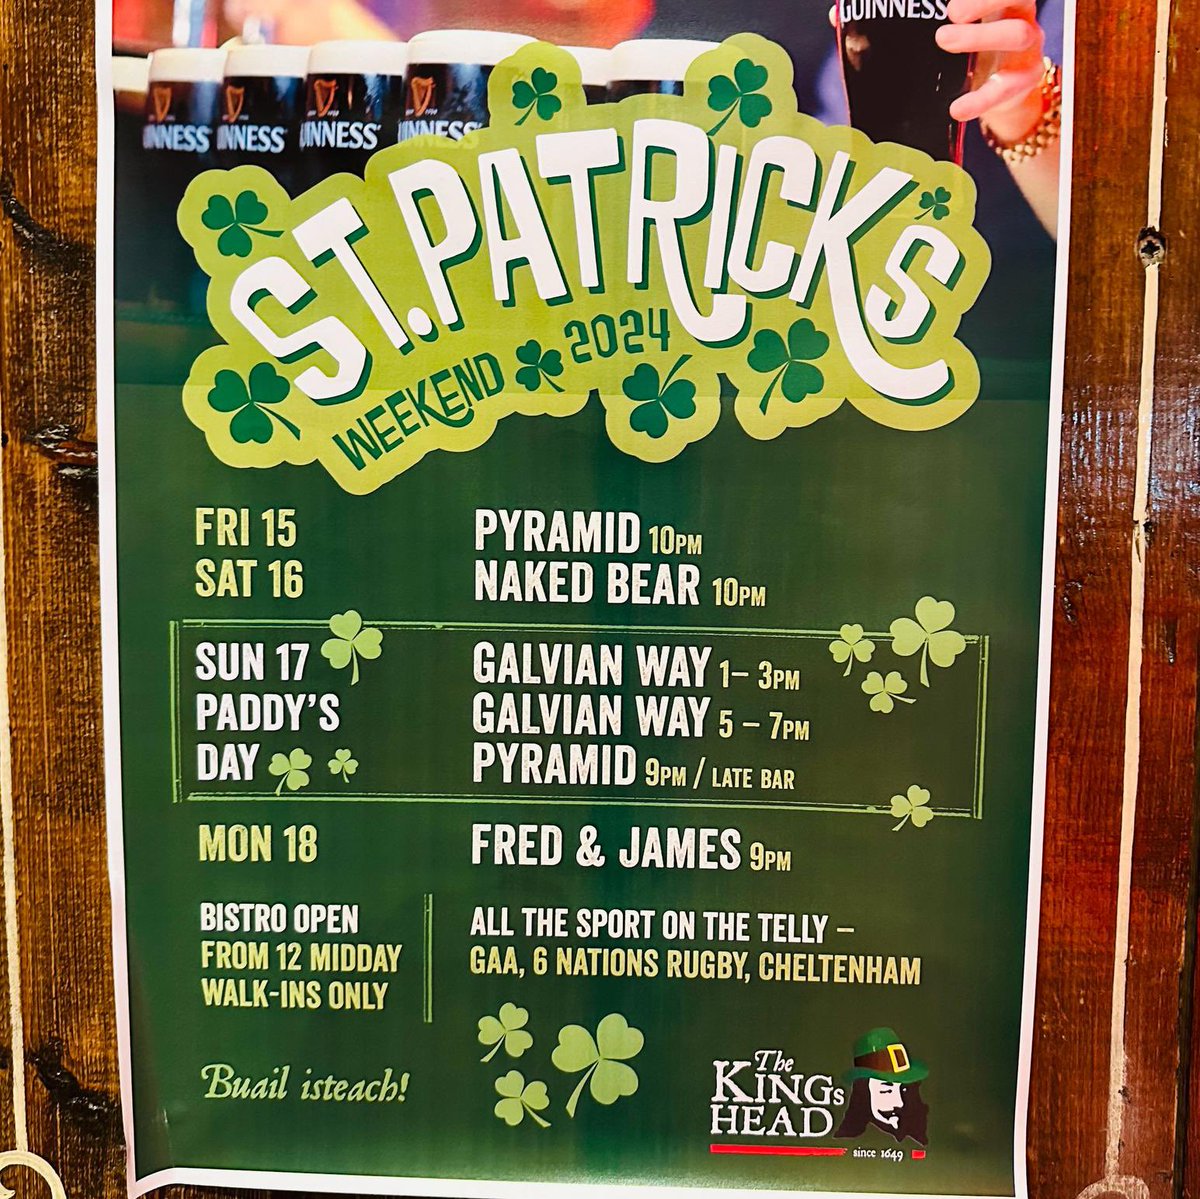 The stage is set for a fantastic St Patrick's Weekend ☘️🇮🇪☘️ Our Bistro is open for lunch & dinner every day, live music every night, great Irish whiskeys, cracking cocktails & craft beers, plus all the sport on the telly Buail Isteach ☘️👑☘️ #stpatricksday #galway #paddysday